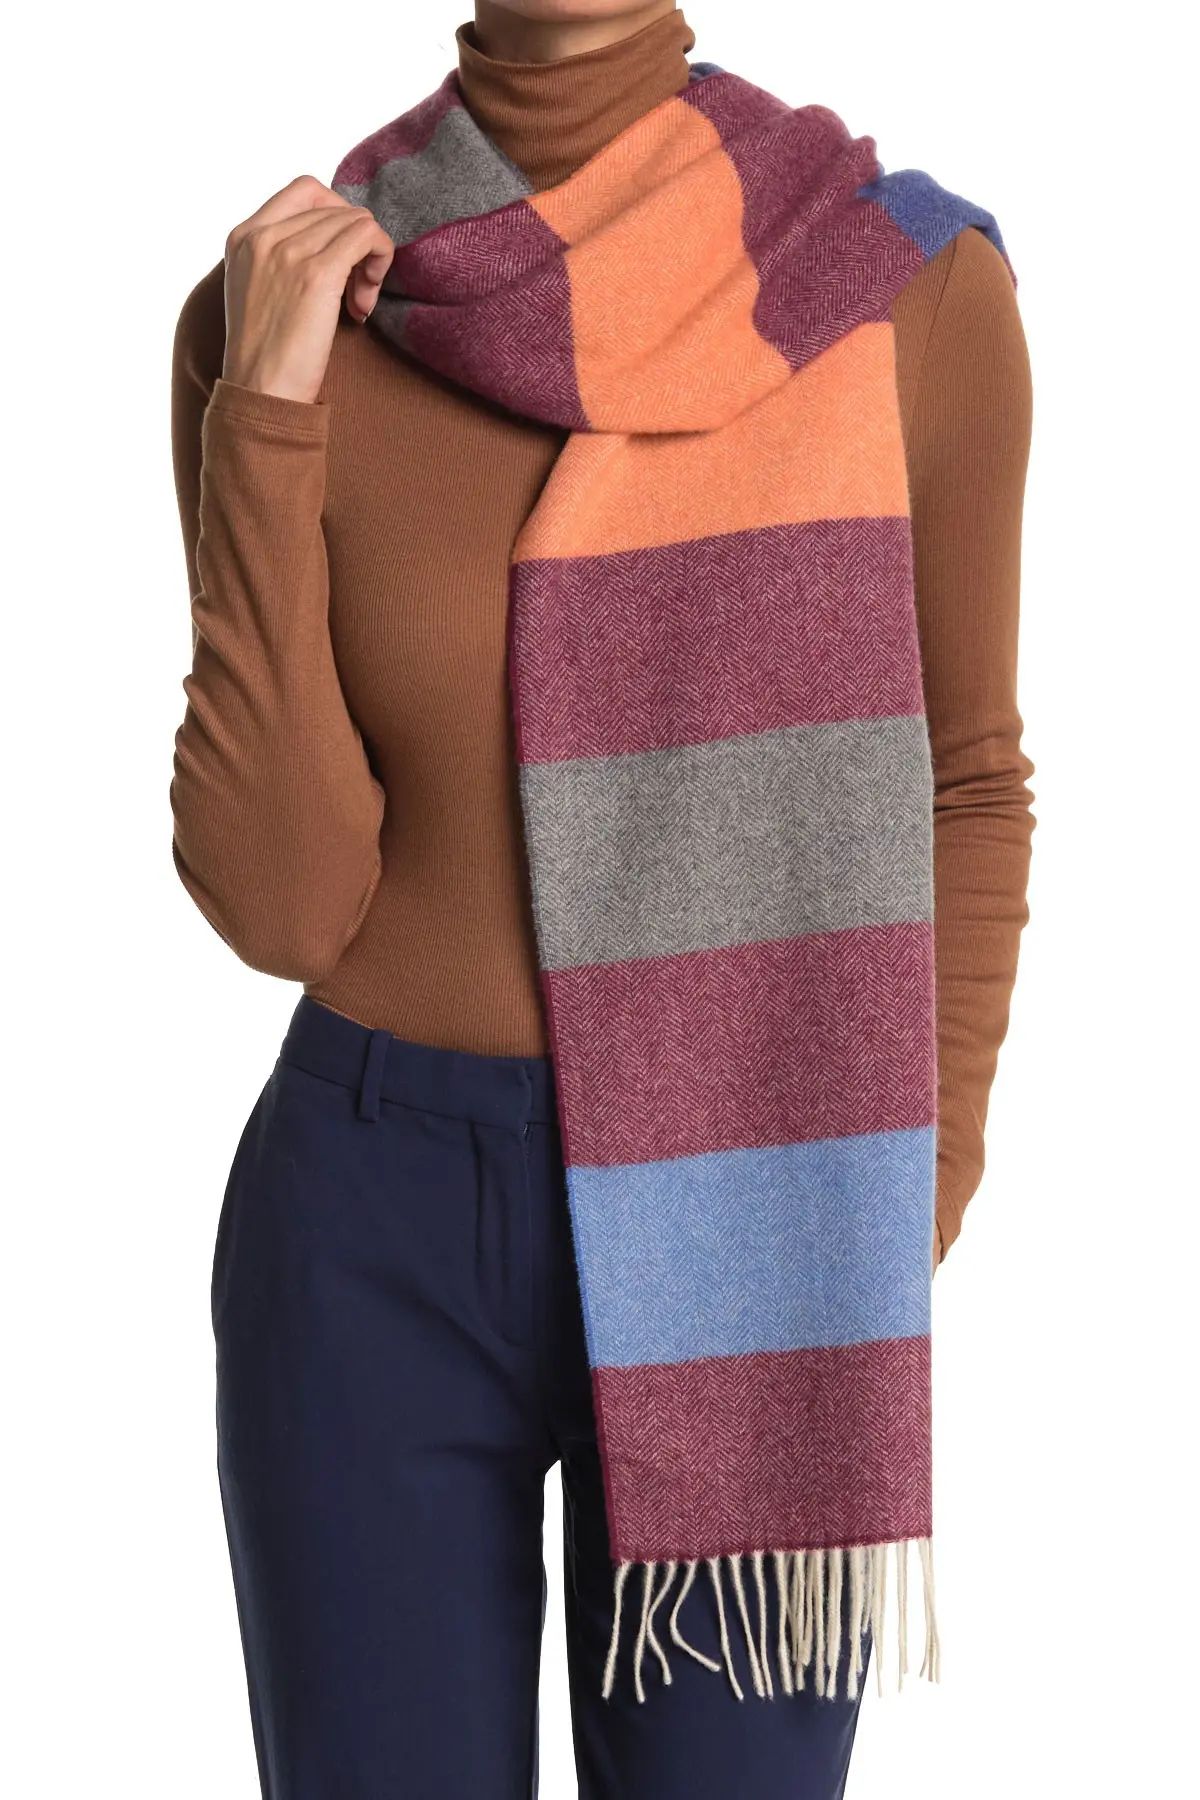 Chelsey Imports | Candy Stripe Cashmere Scarf | Nordstrom Rack | Nordstrom Rack